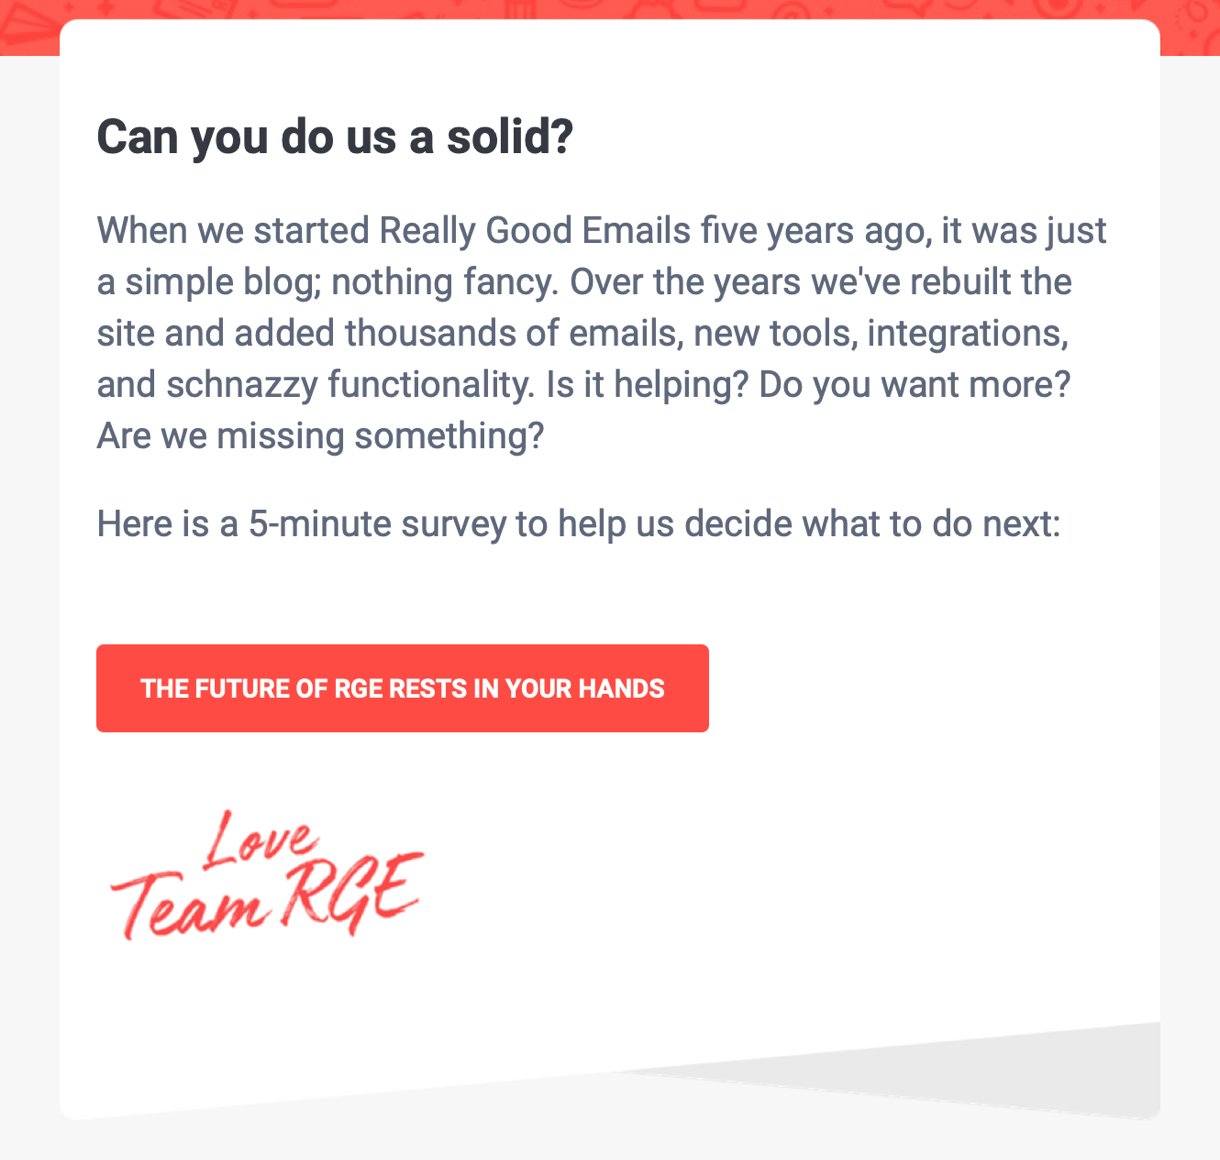 Really Good Emails survey email example